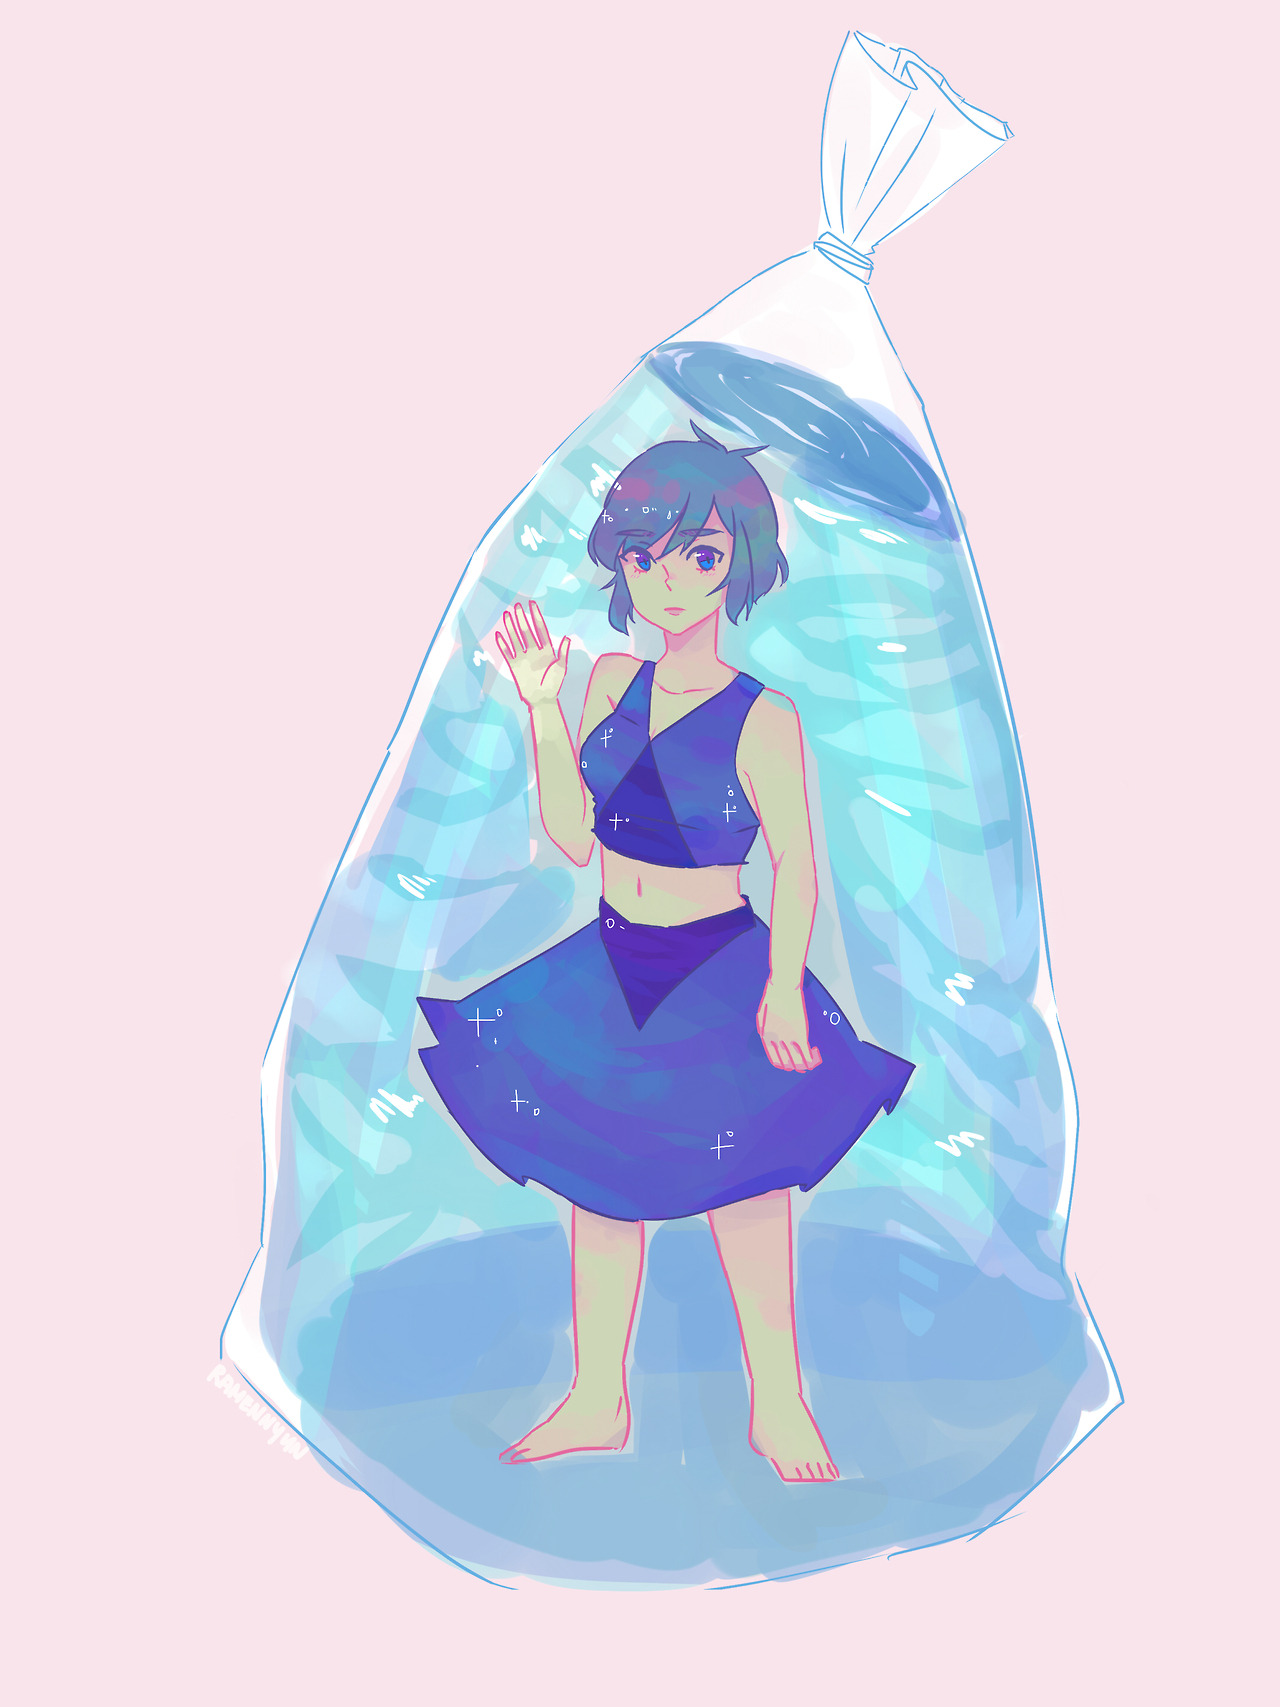 steven universe au where everything’s the same except they trapped lapis in one of those fish bags instead